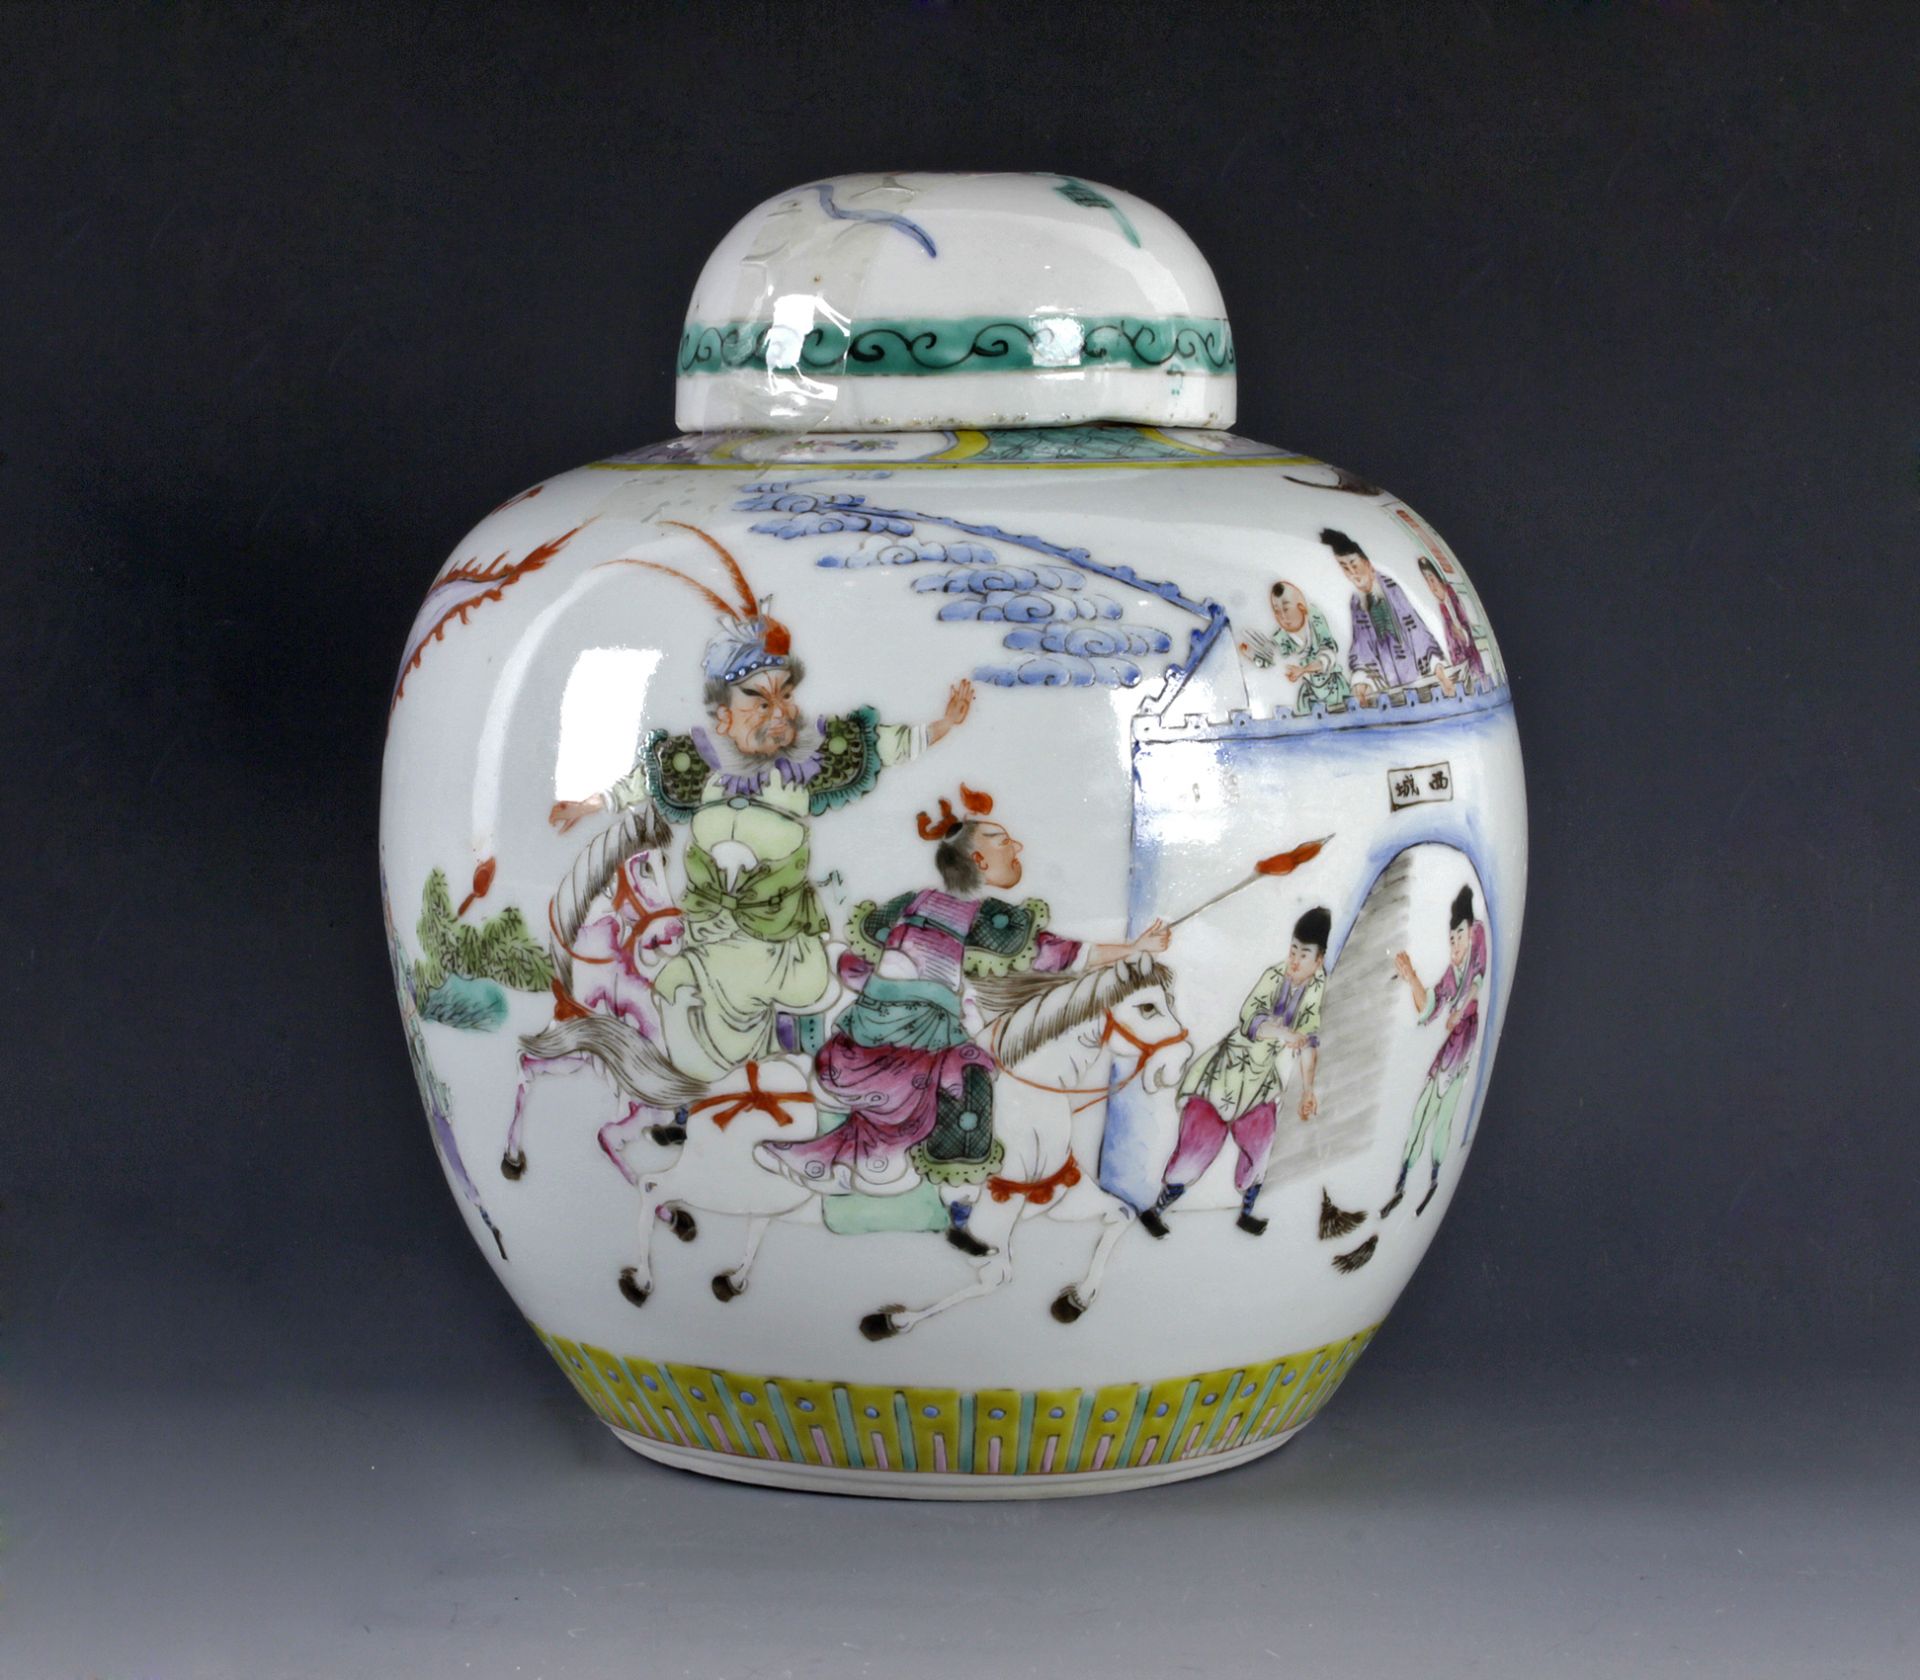 A 20th century Chinese porcelain ginger jar, Republic period